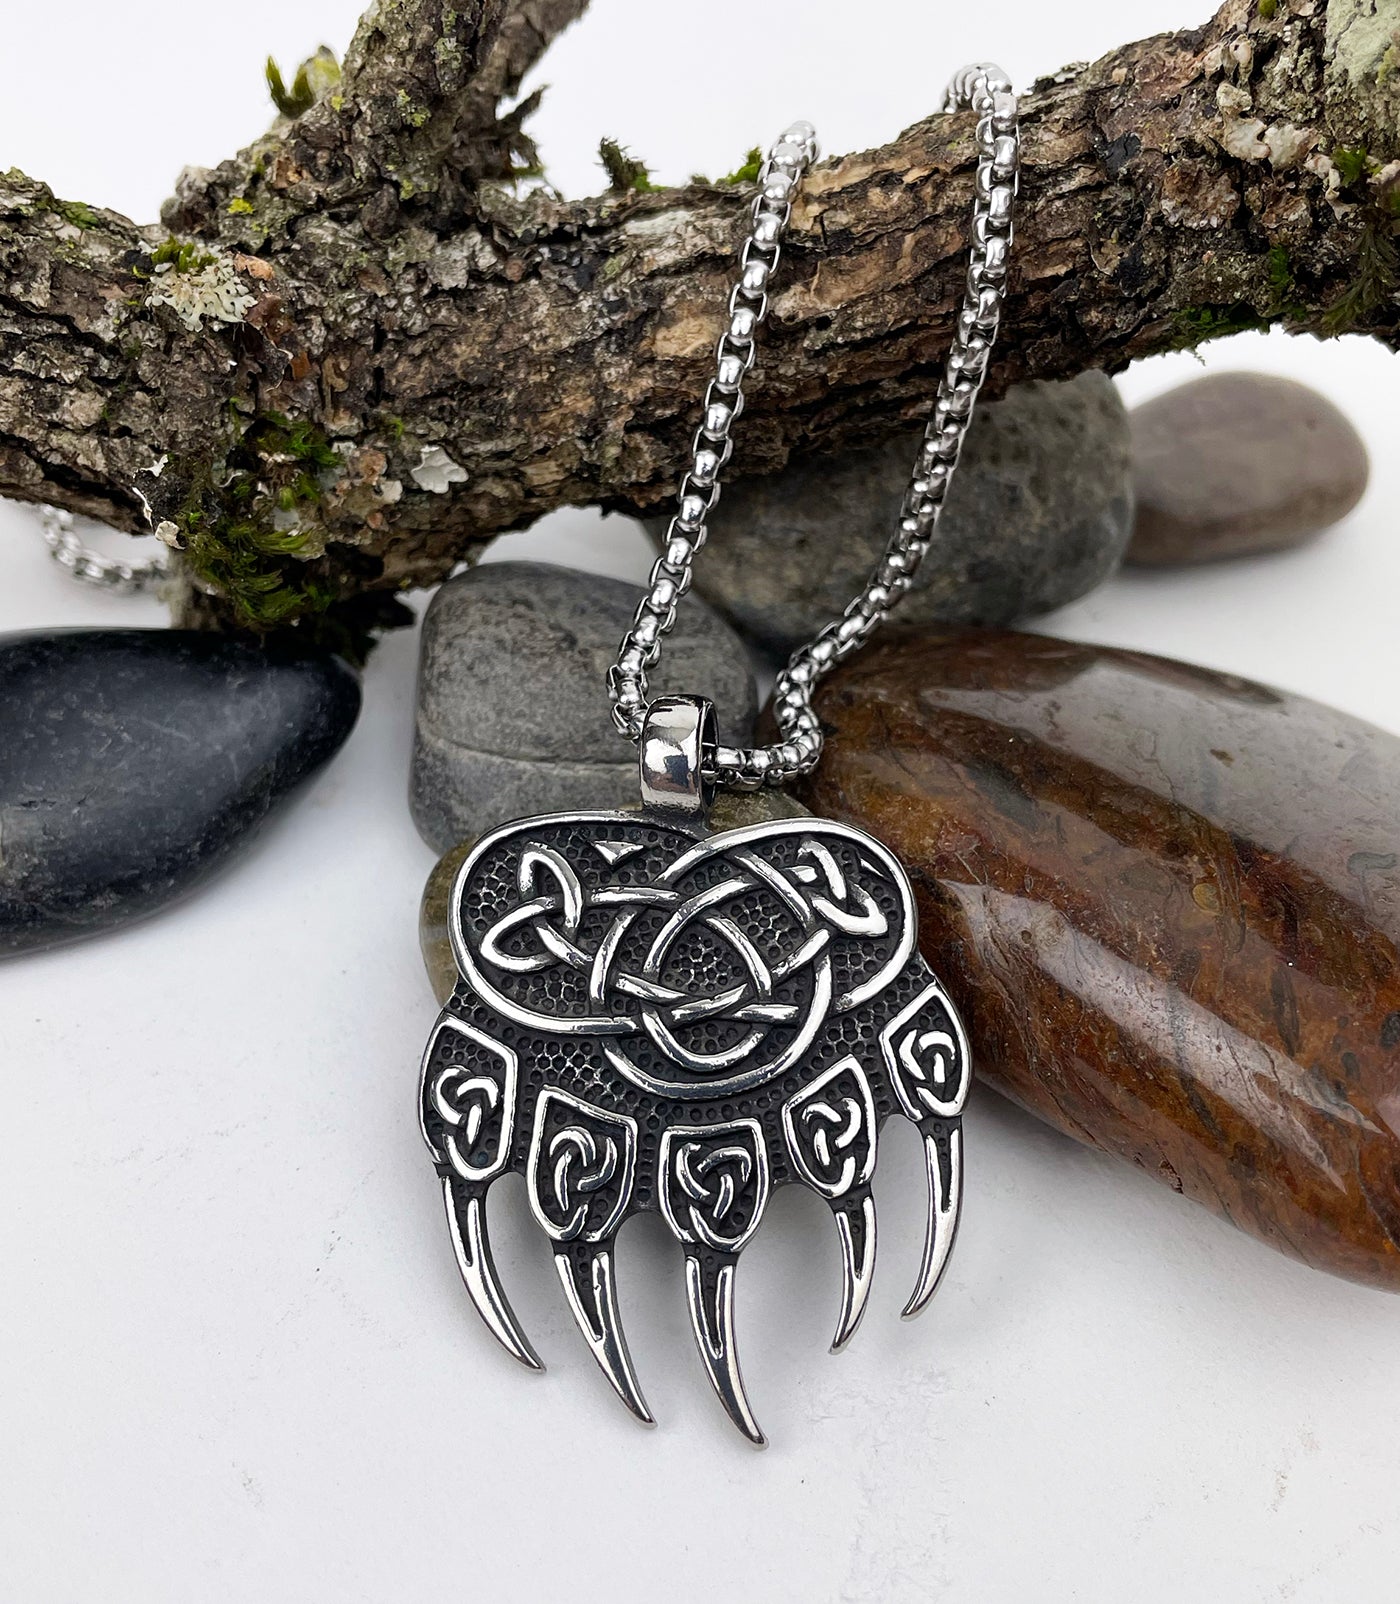 Oden Celtic Knot Bear Claw Stainless Steel Pendant